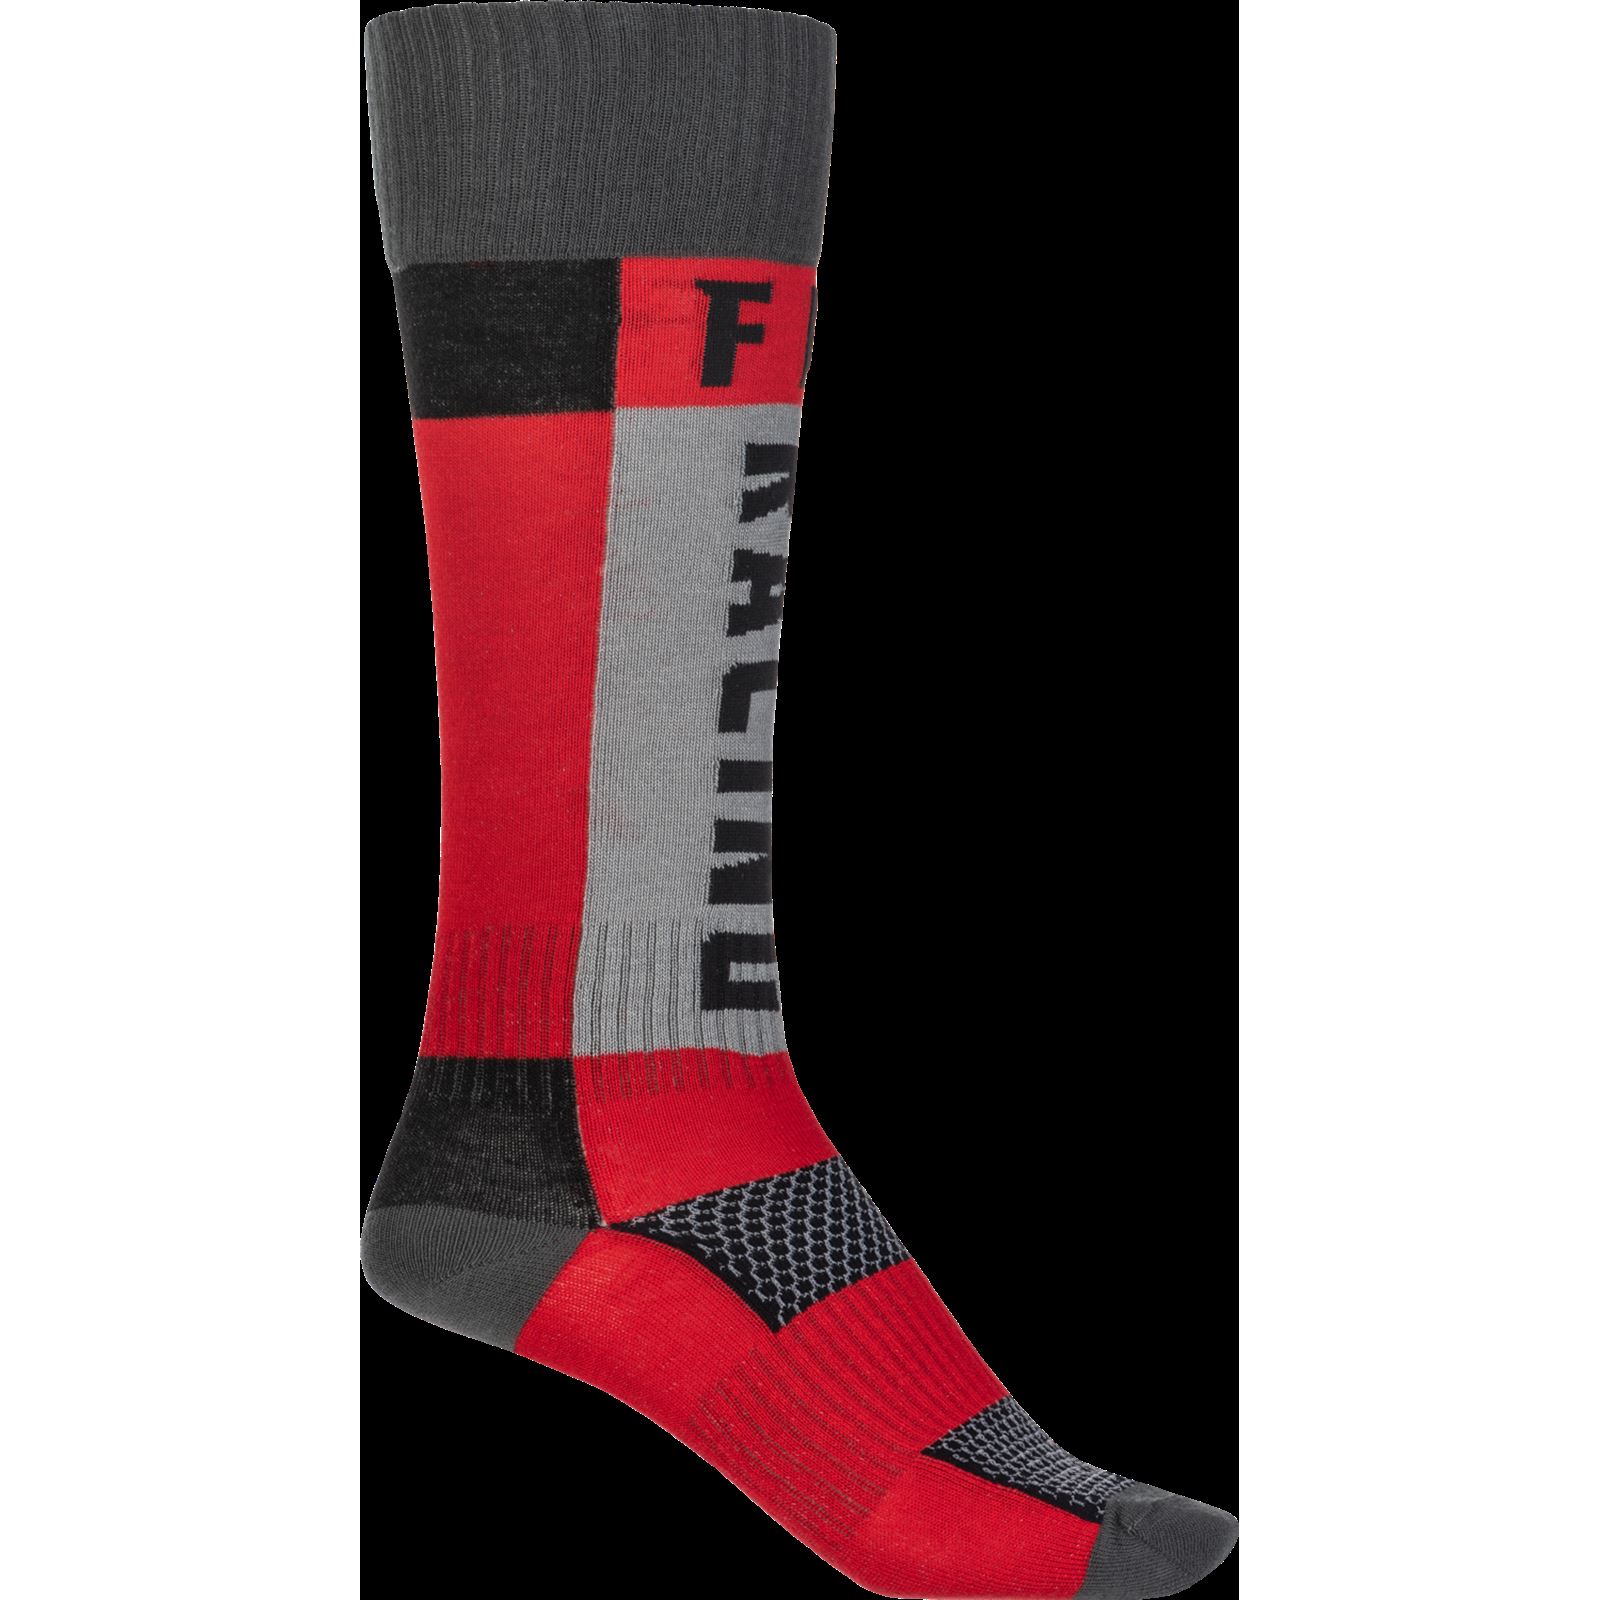 Fly Racing MX Socks Thick Red/Grey SM/MD